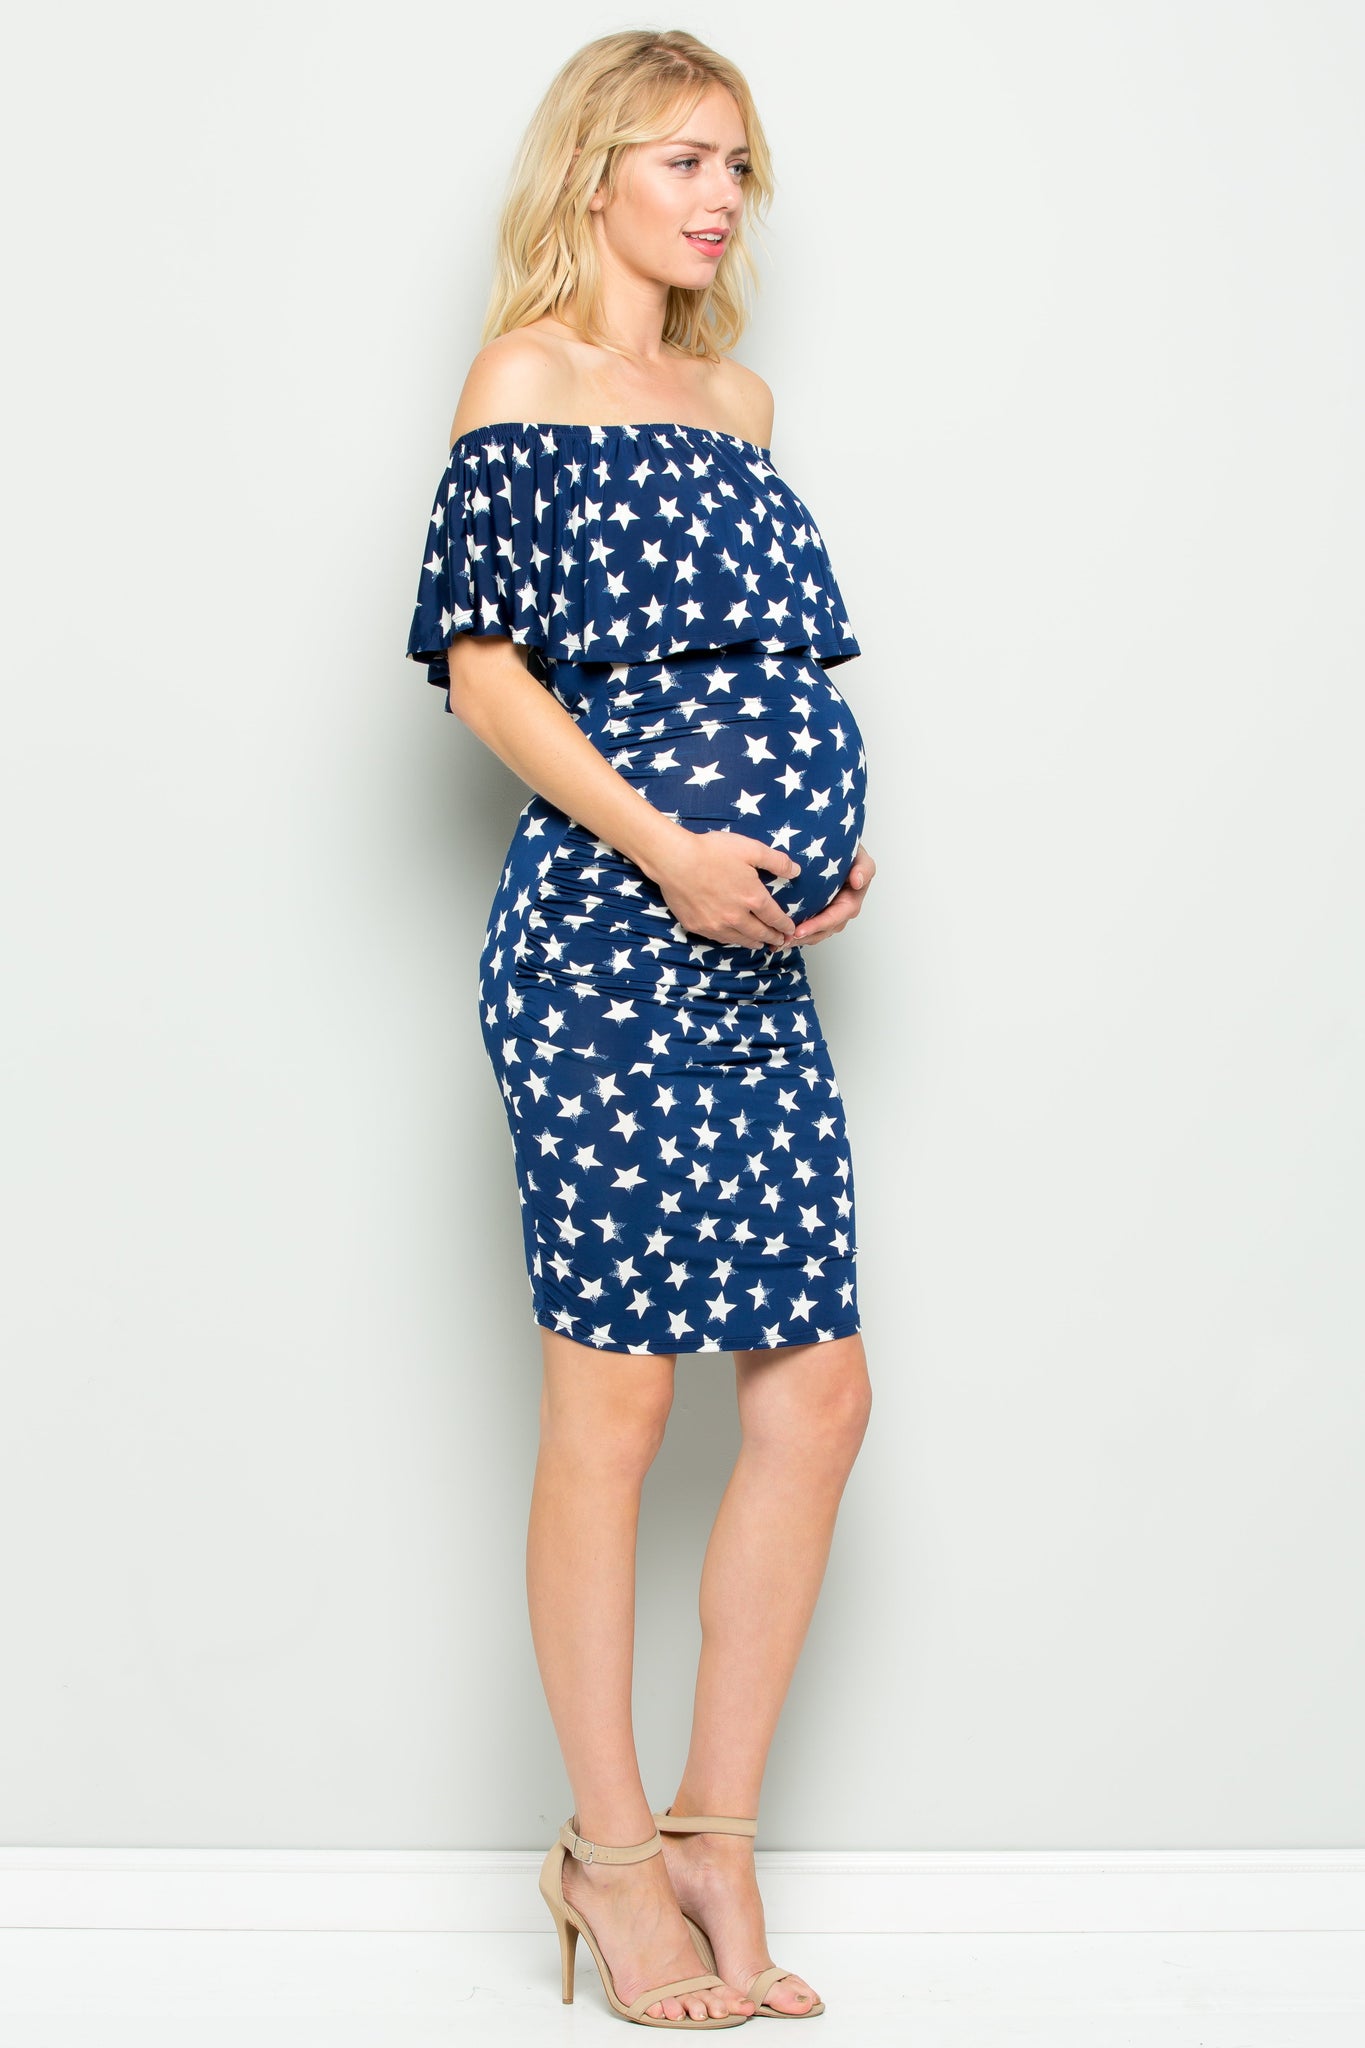 maternity pregnancy baby shower floral off shoulder ruffle neck above knee summer cocktail bodycon dress